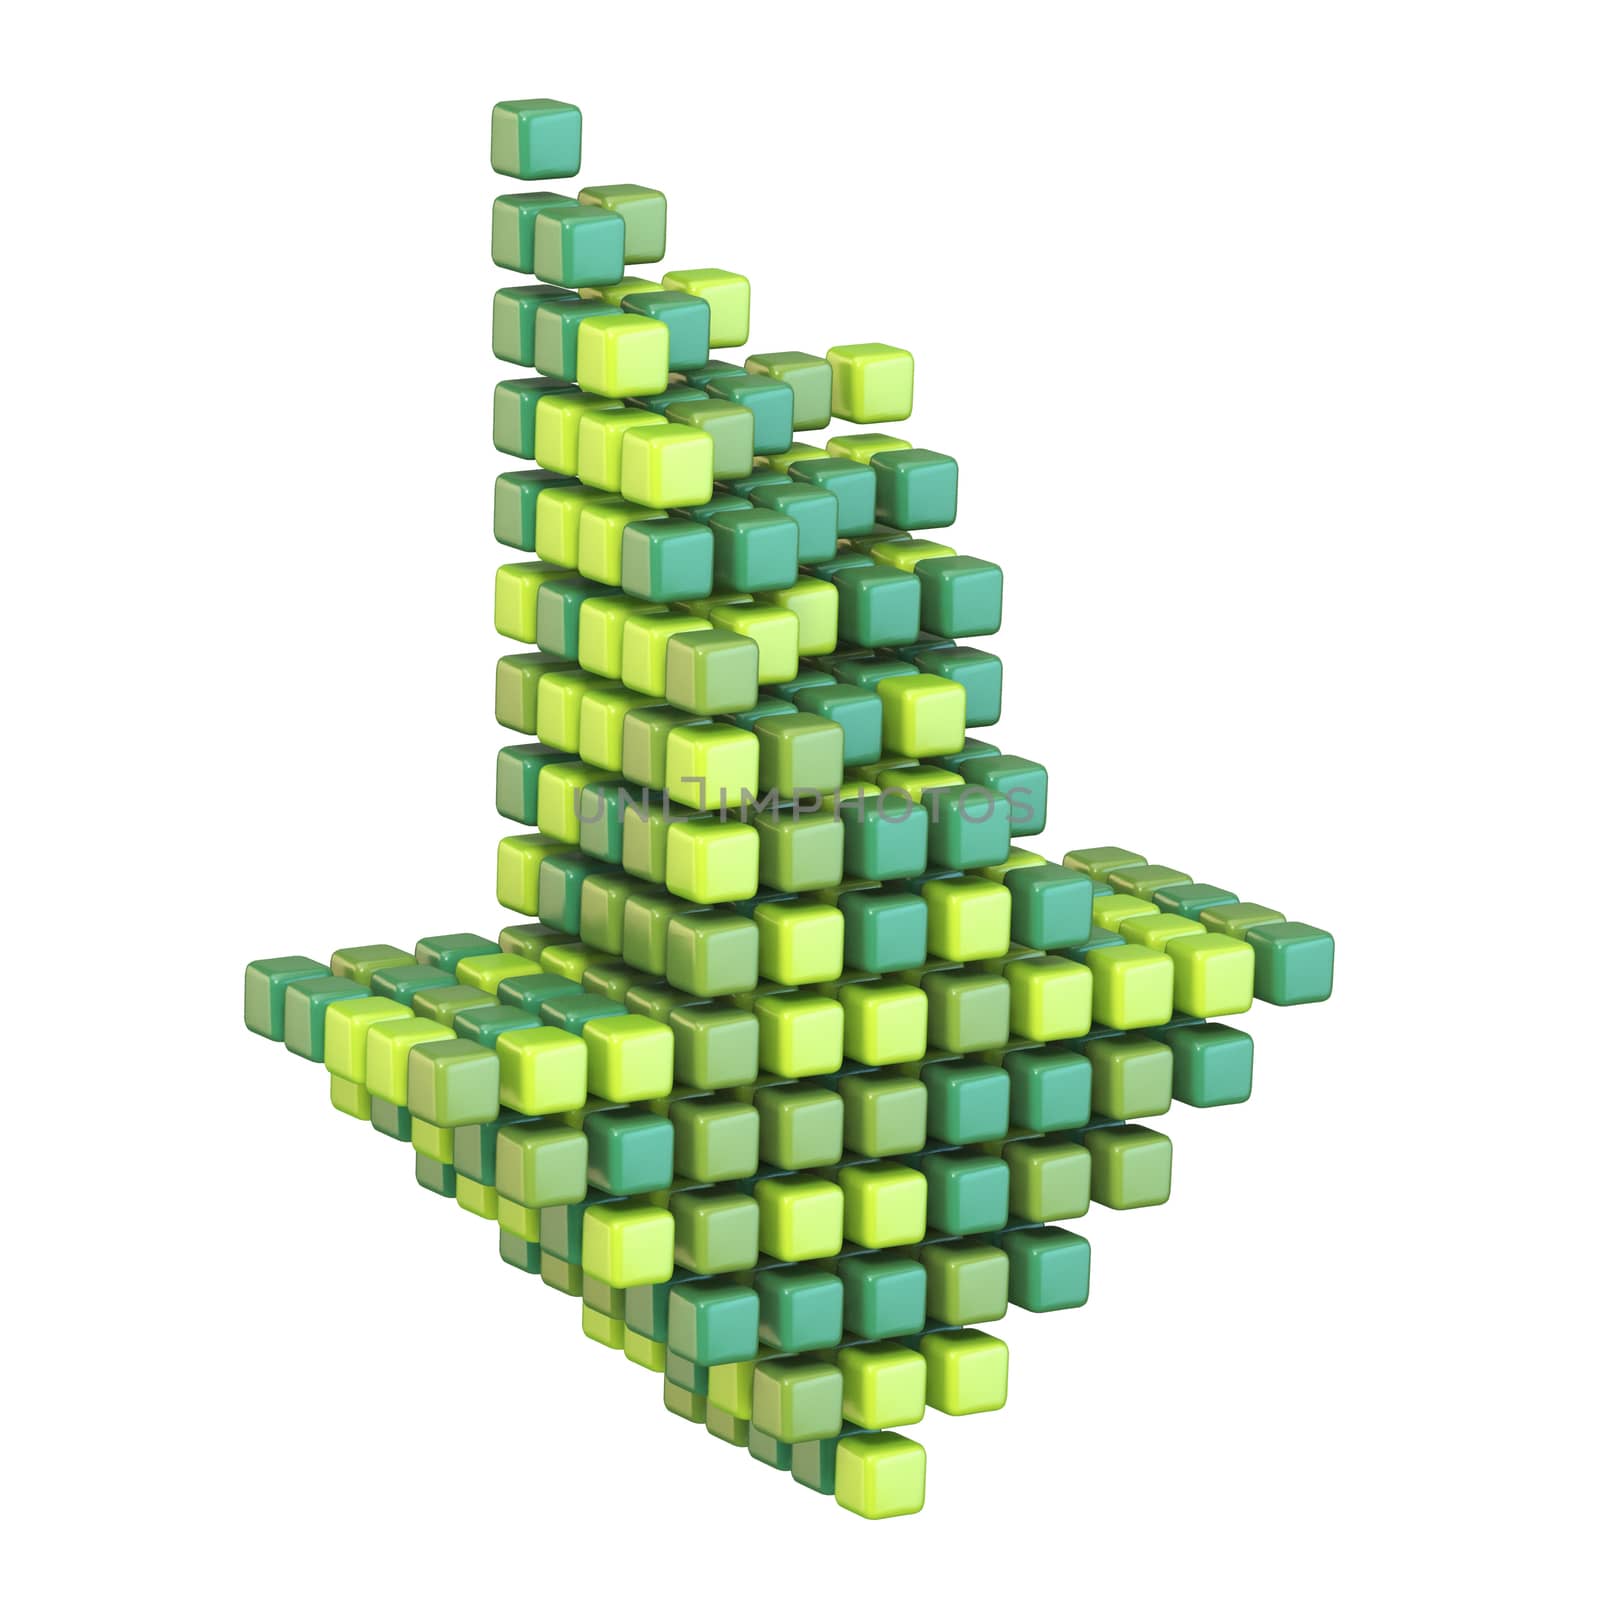 Download arrow made of different green cubes 3D render illustration isolated on white background